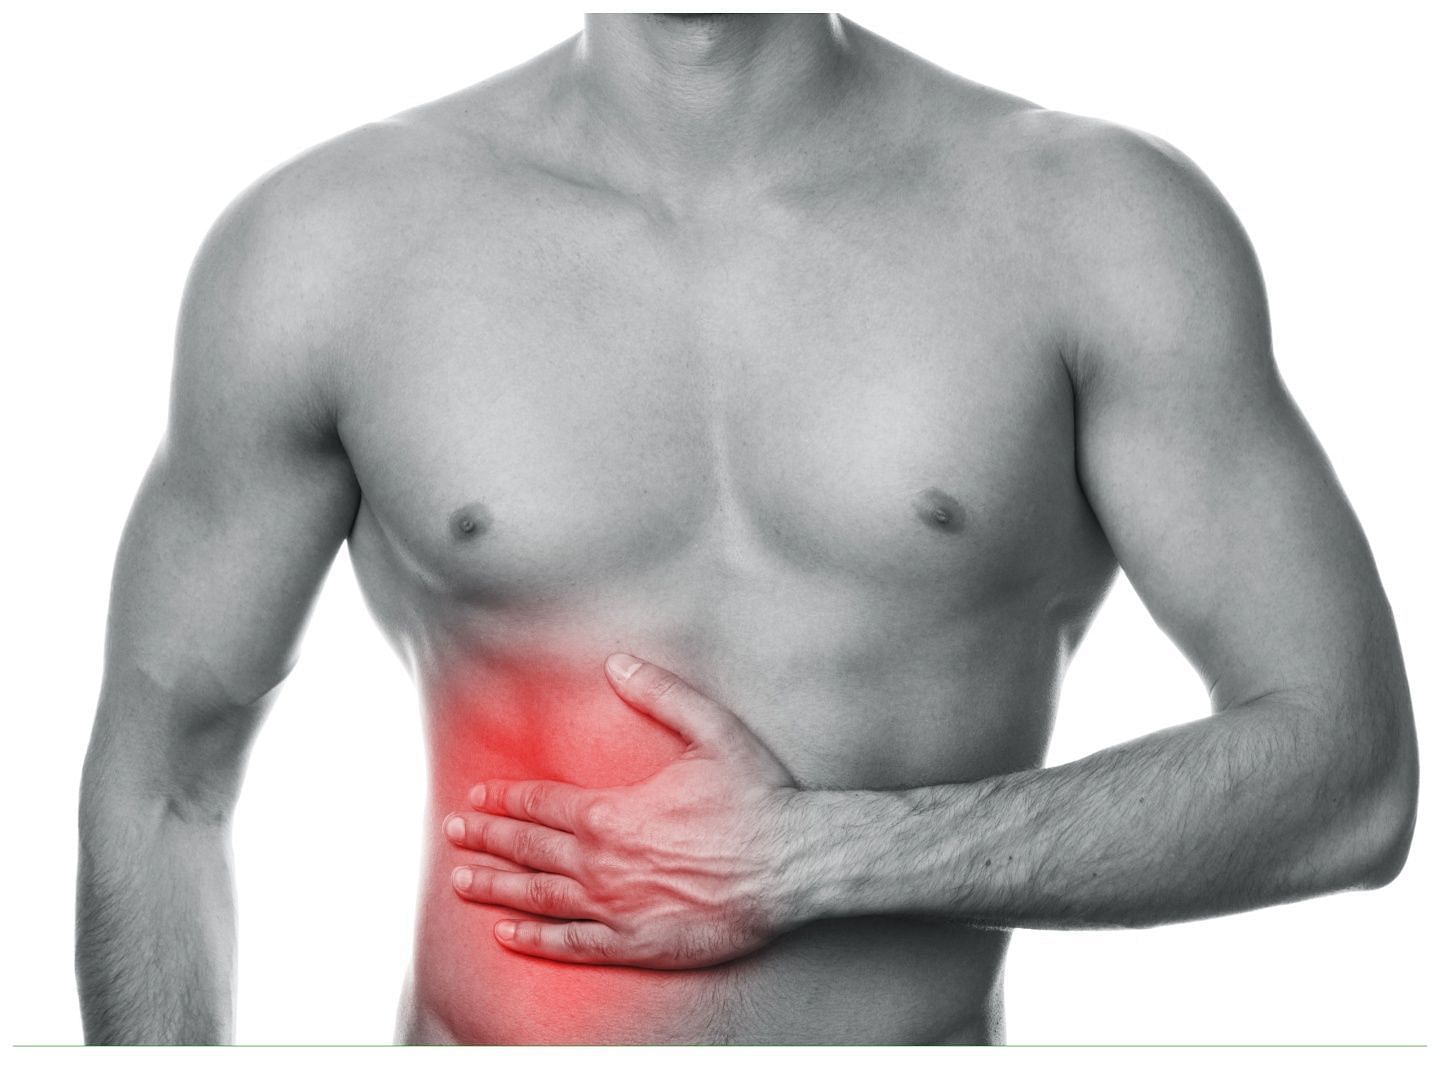 Multiple factors can cause pain in right rib cage (Image via Vecteezy)